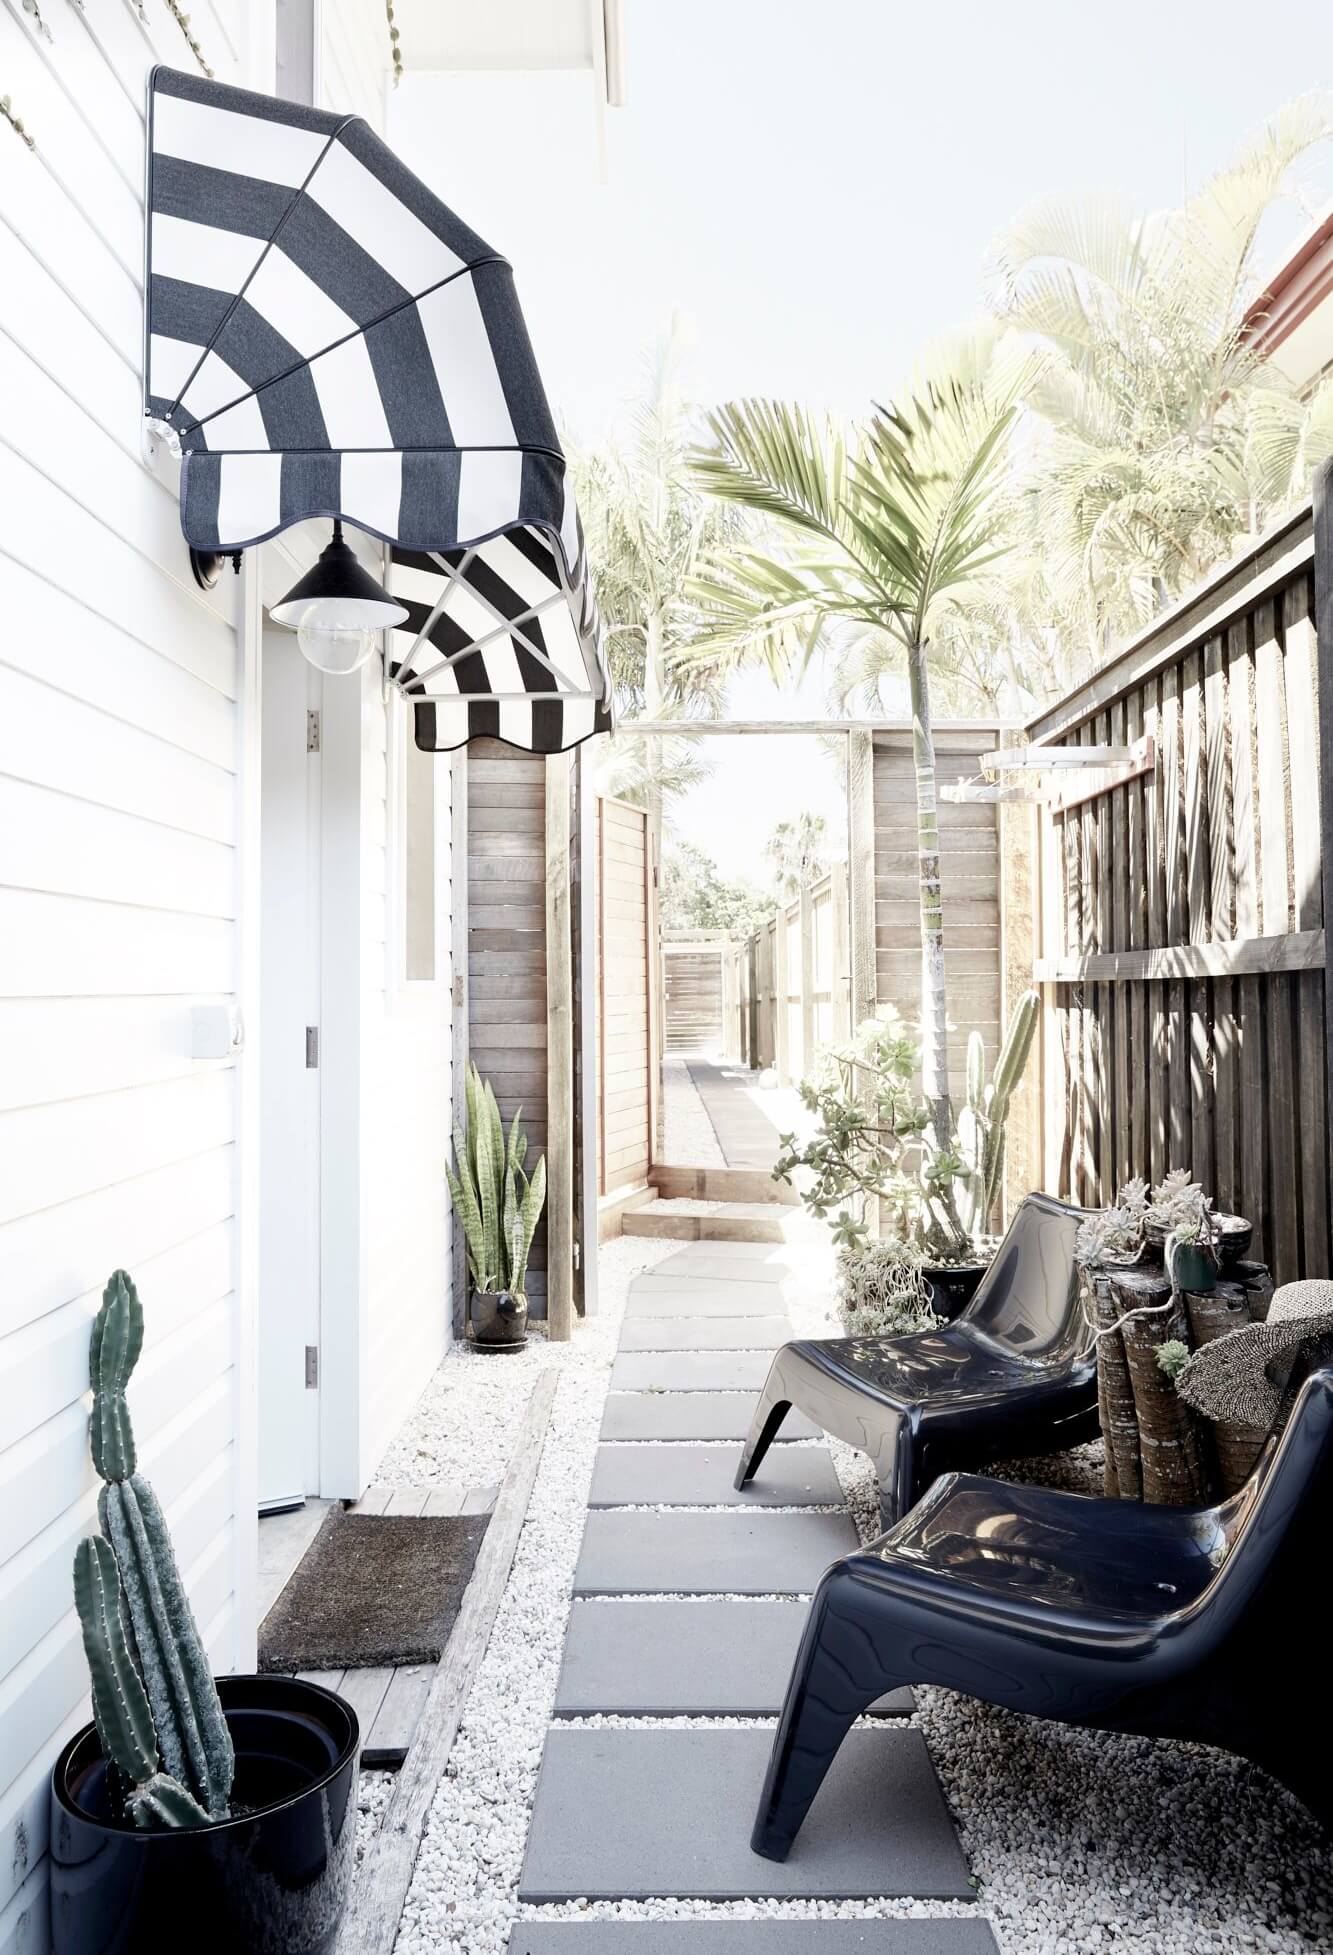 Black and white striped awnings at the entrance to The Chapel, Byron Beach Abodes